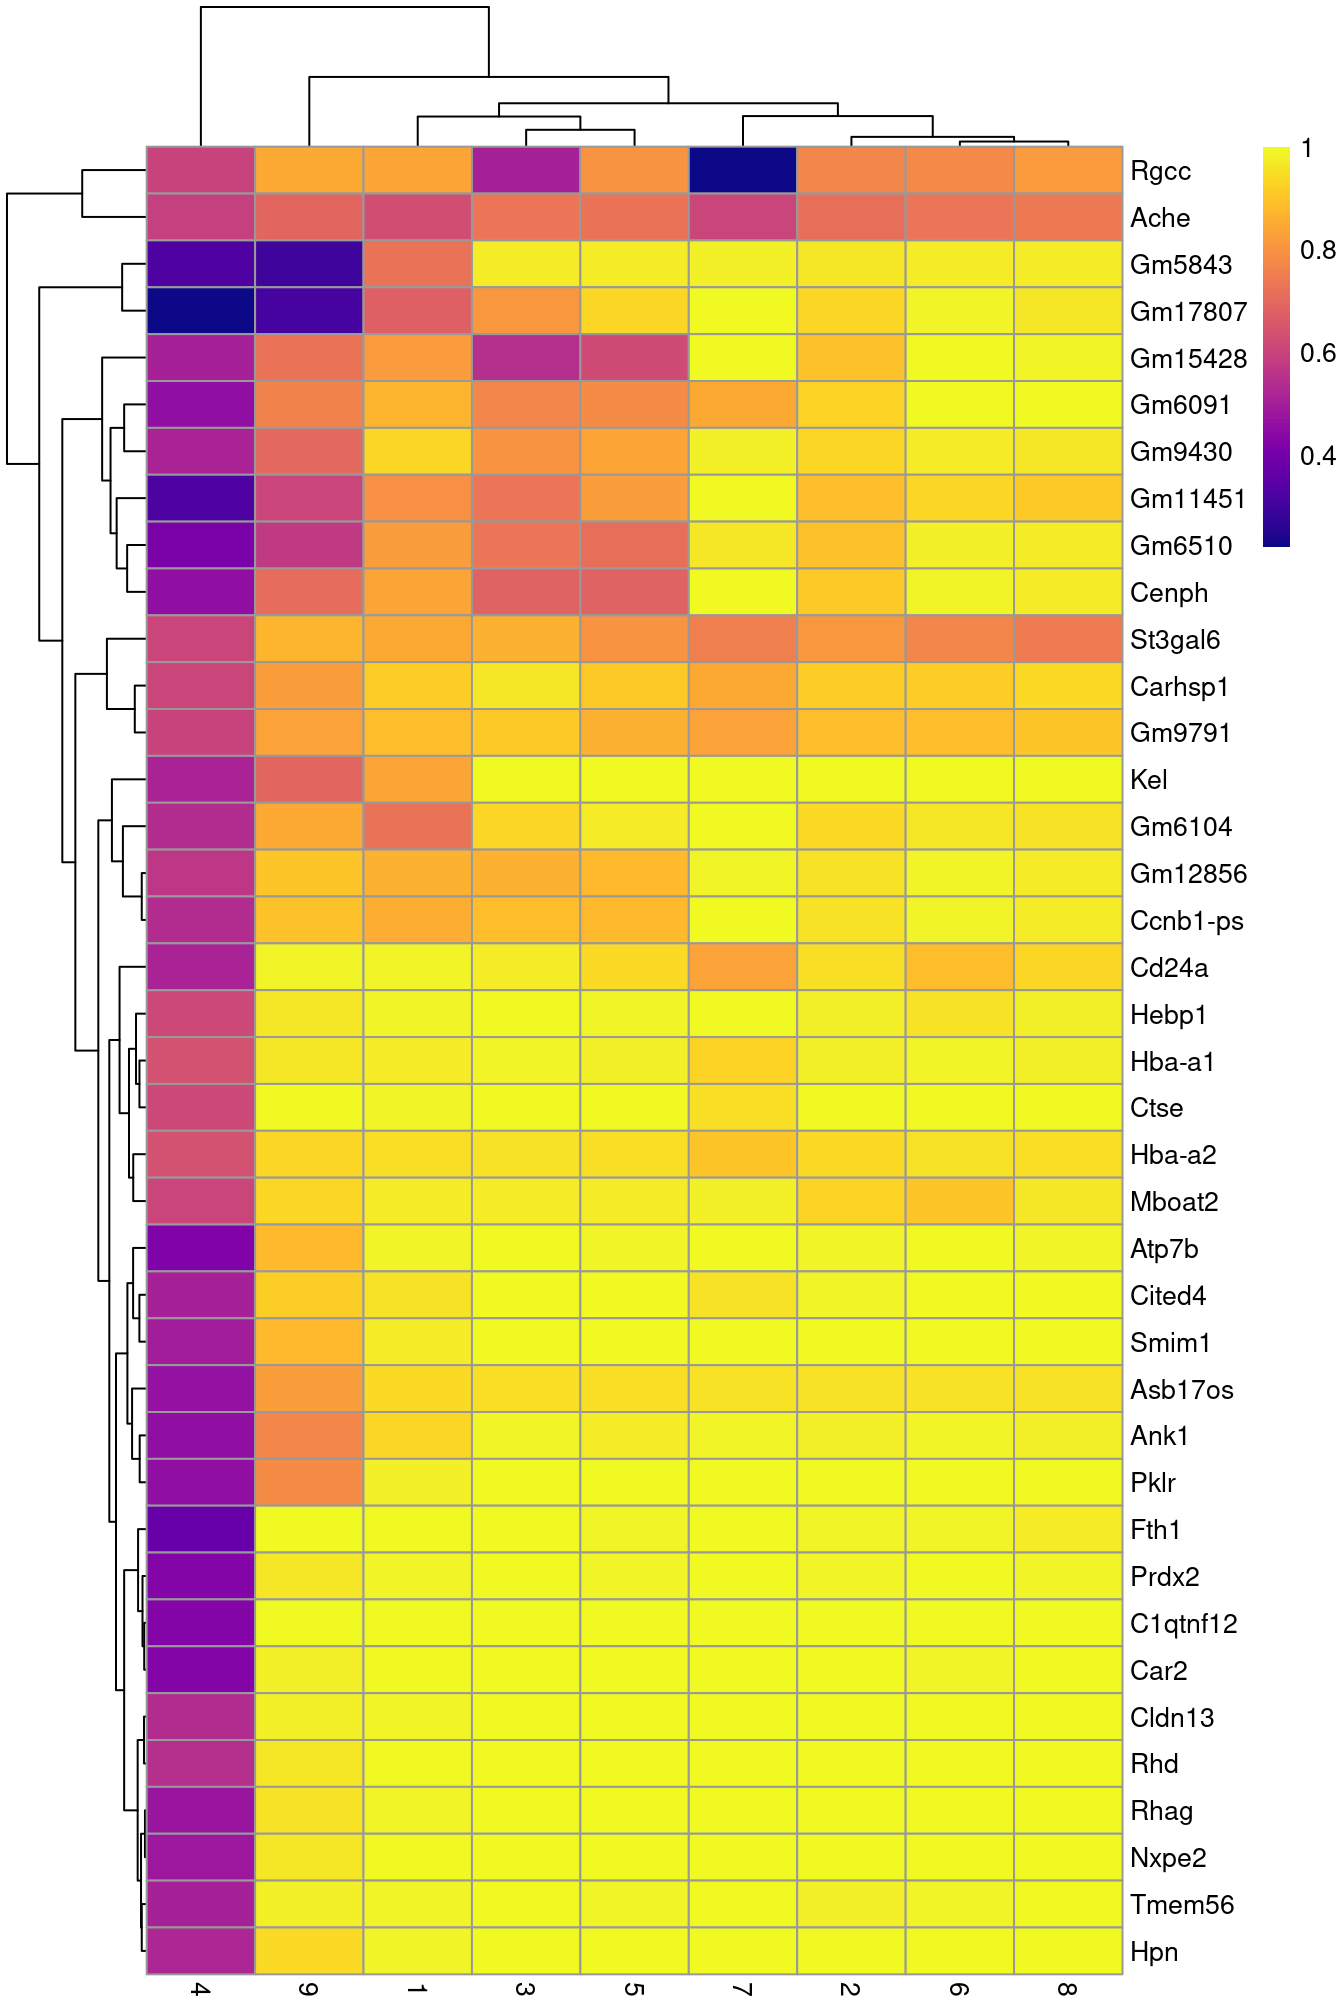 Heatmap of the AUCs for the top marker genes in cluster 10 compared to all other clusters.